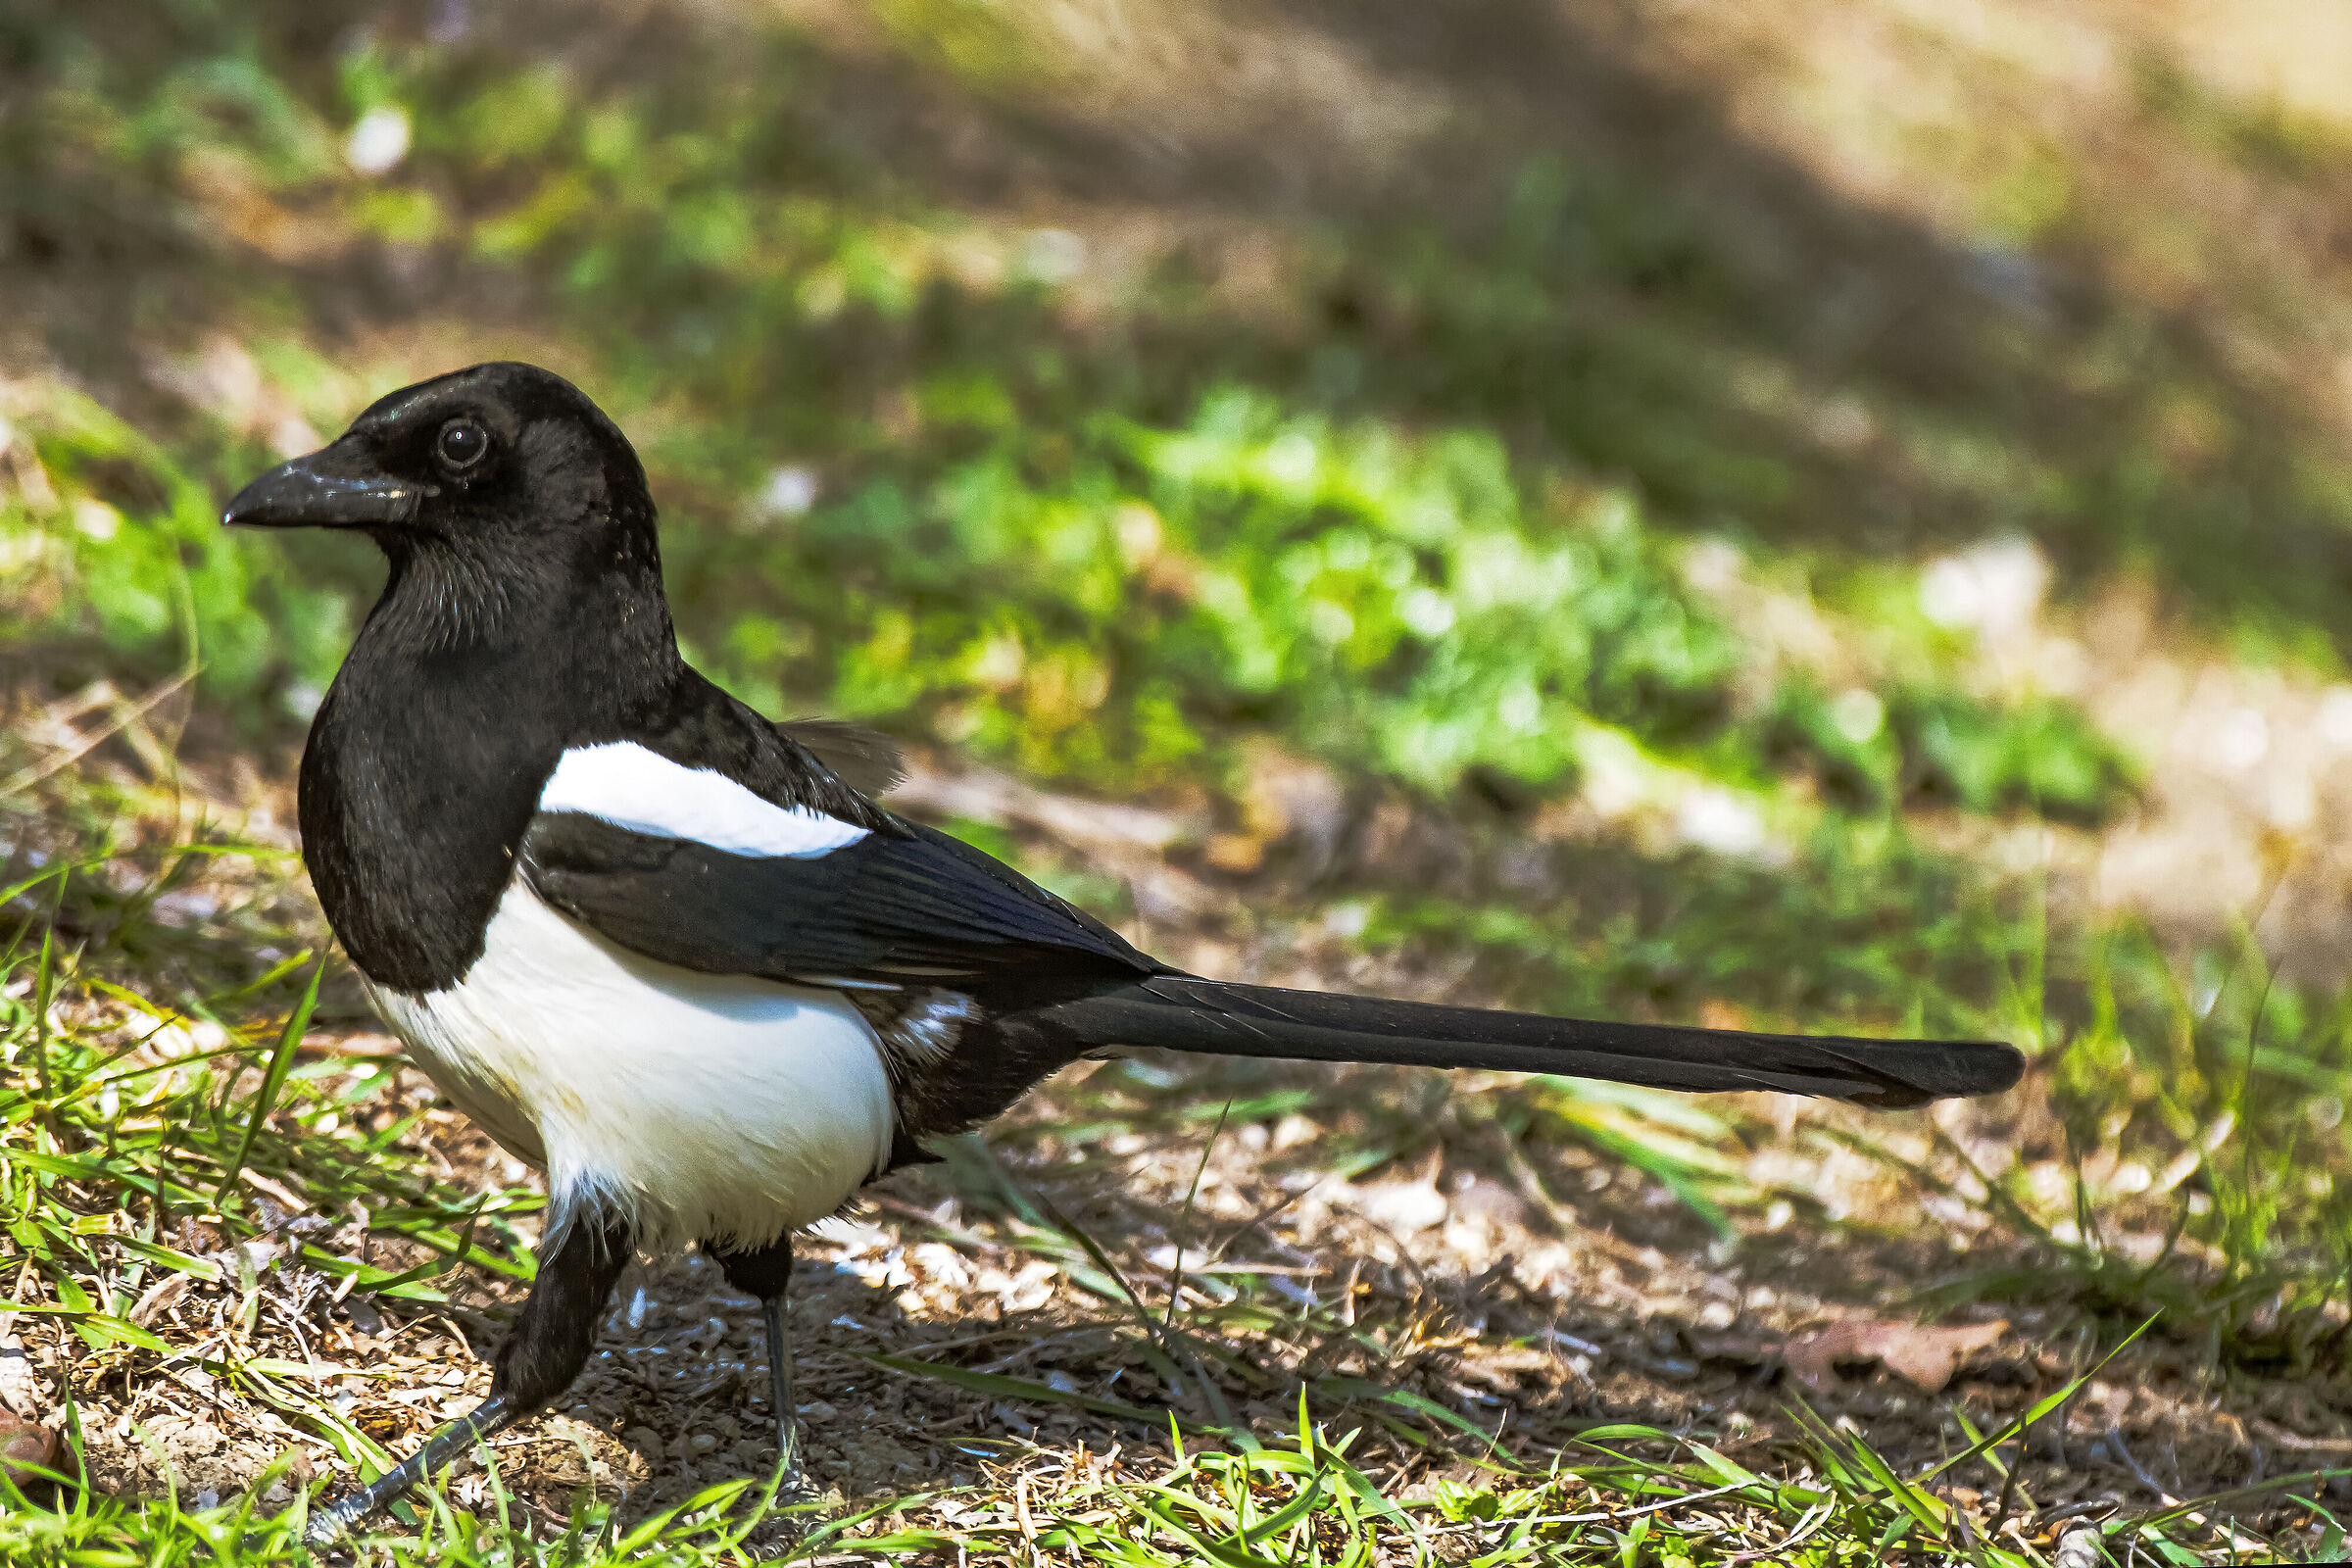 The Magpie thief...